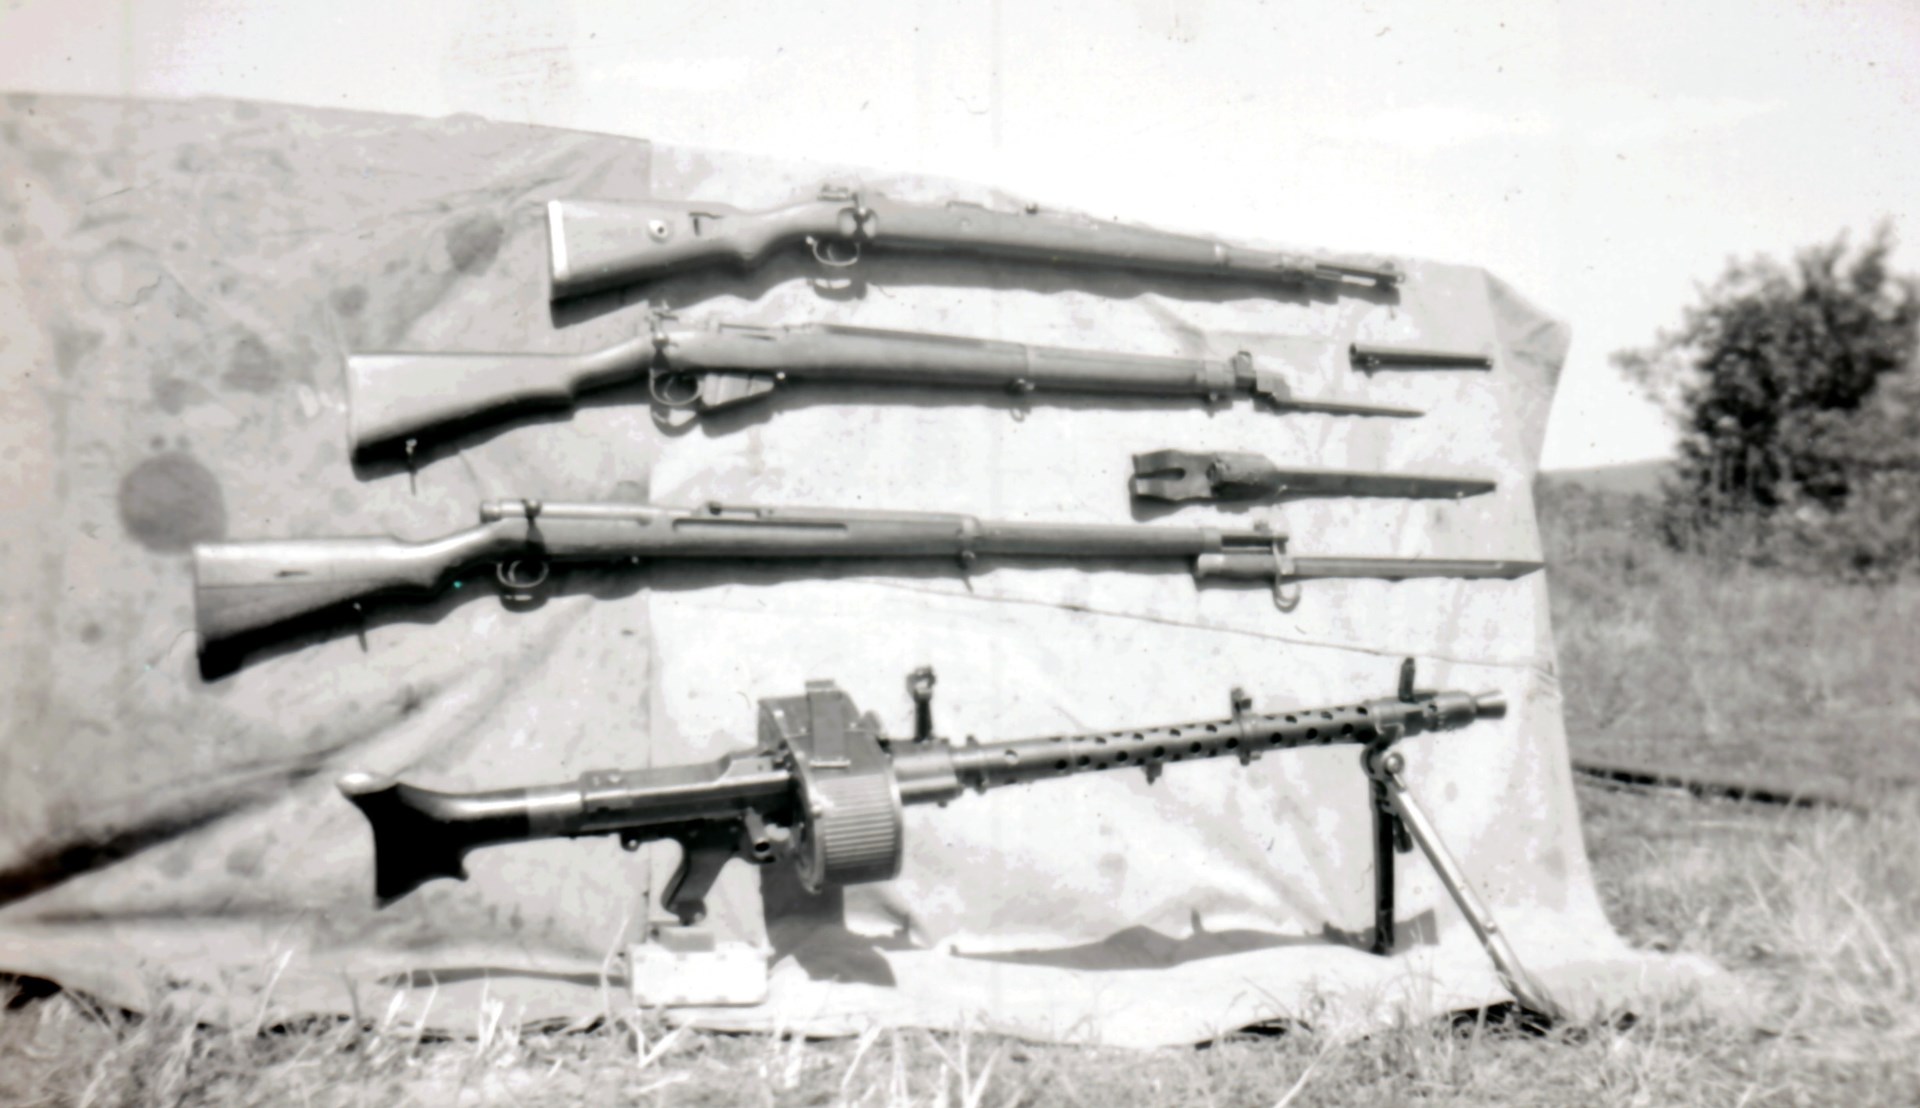 After returning from Kiska: A FSSF display including a captured Japanese Arisaka rifle, along with a German MG34 LMG and Mauser Karabiner 98k rifle, along with a Canadian Lee-Enfield No. 4 Mk I (not used by the Forcemen). Author’s collection